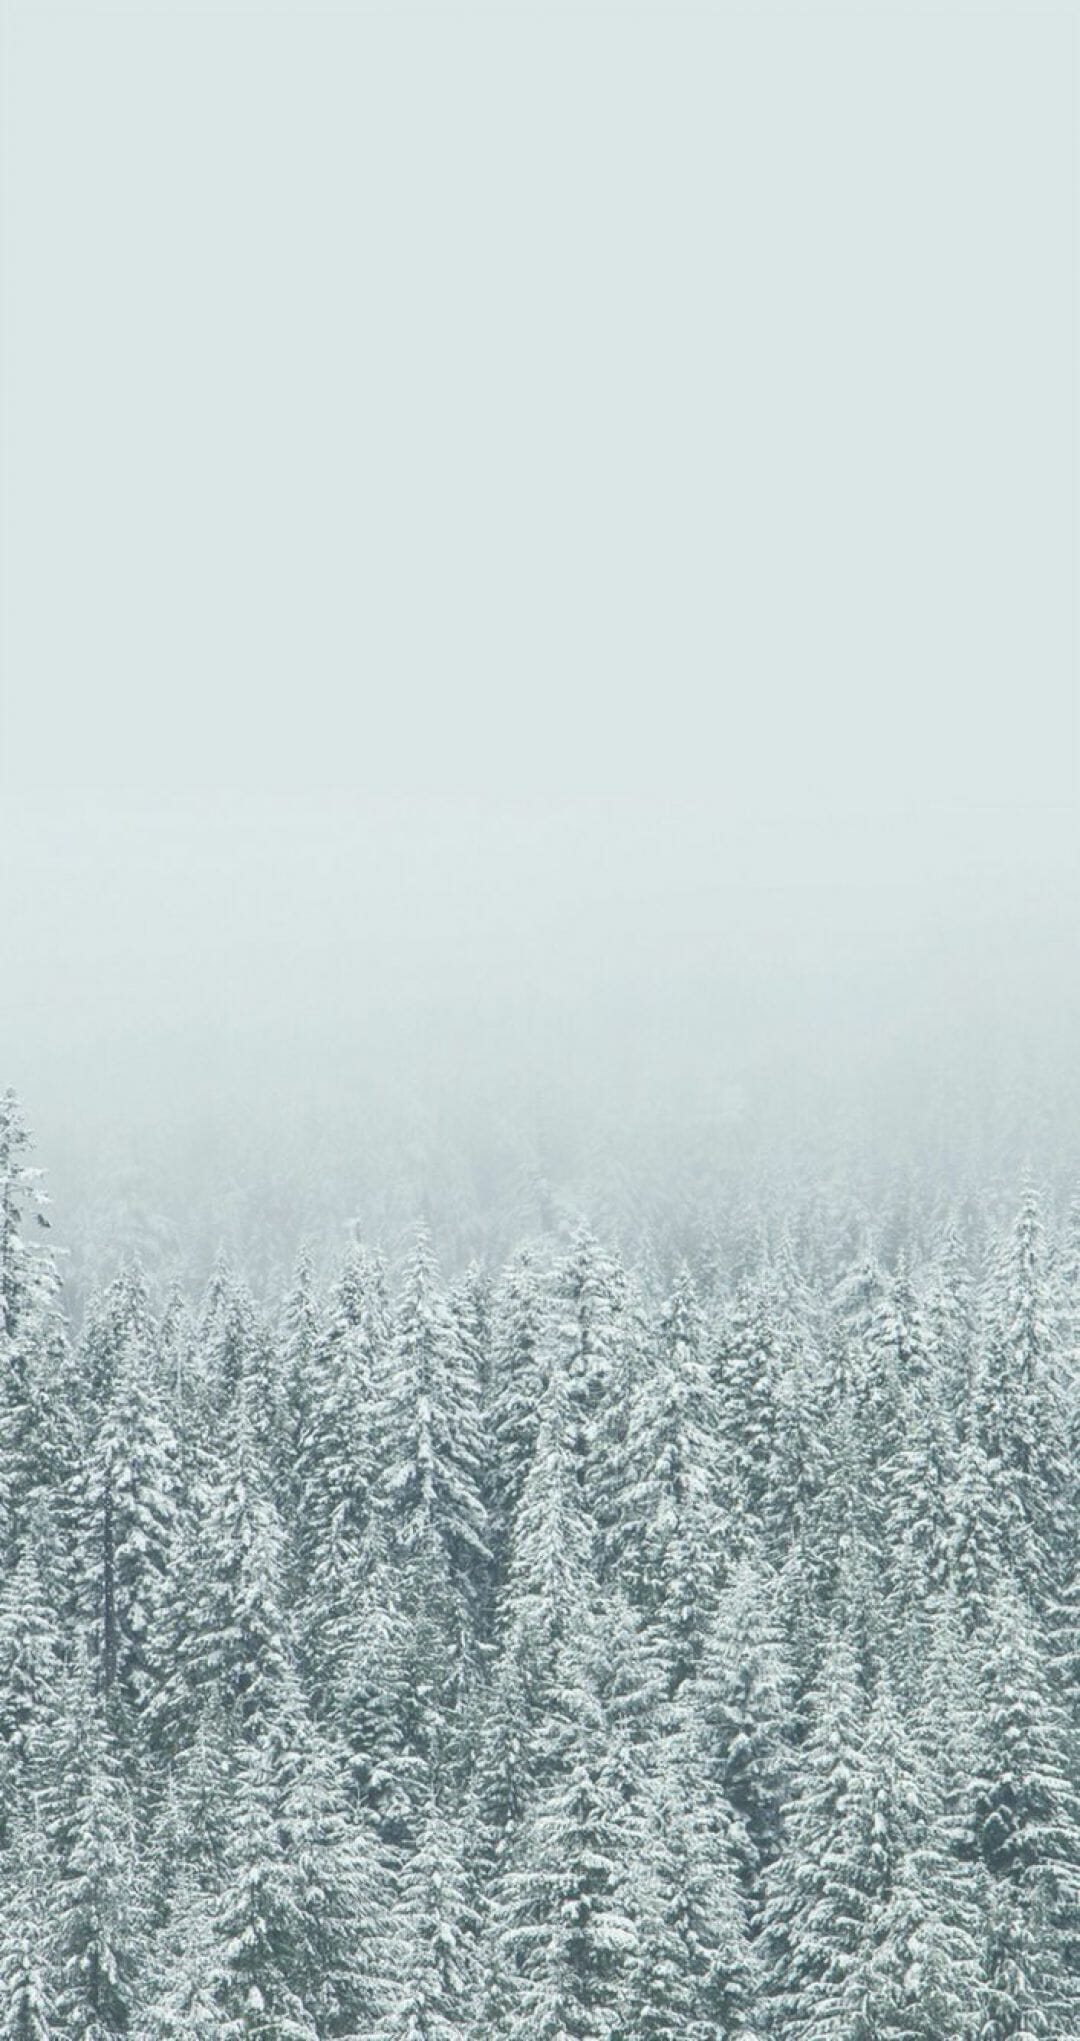 A snow covered forest with some trees - Winter, snow